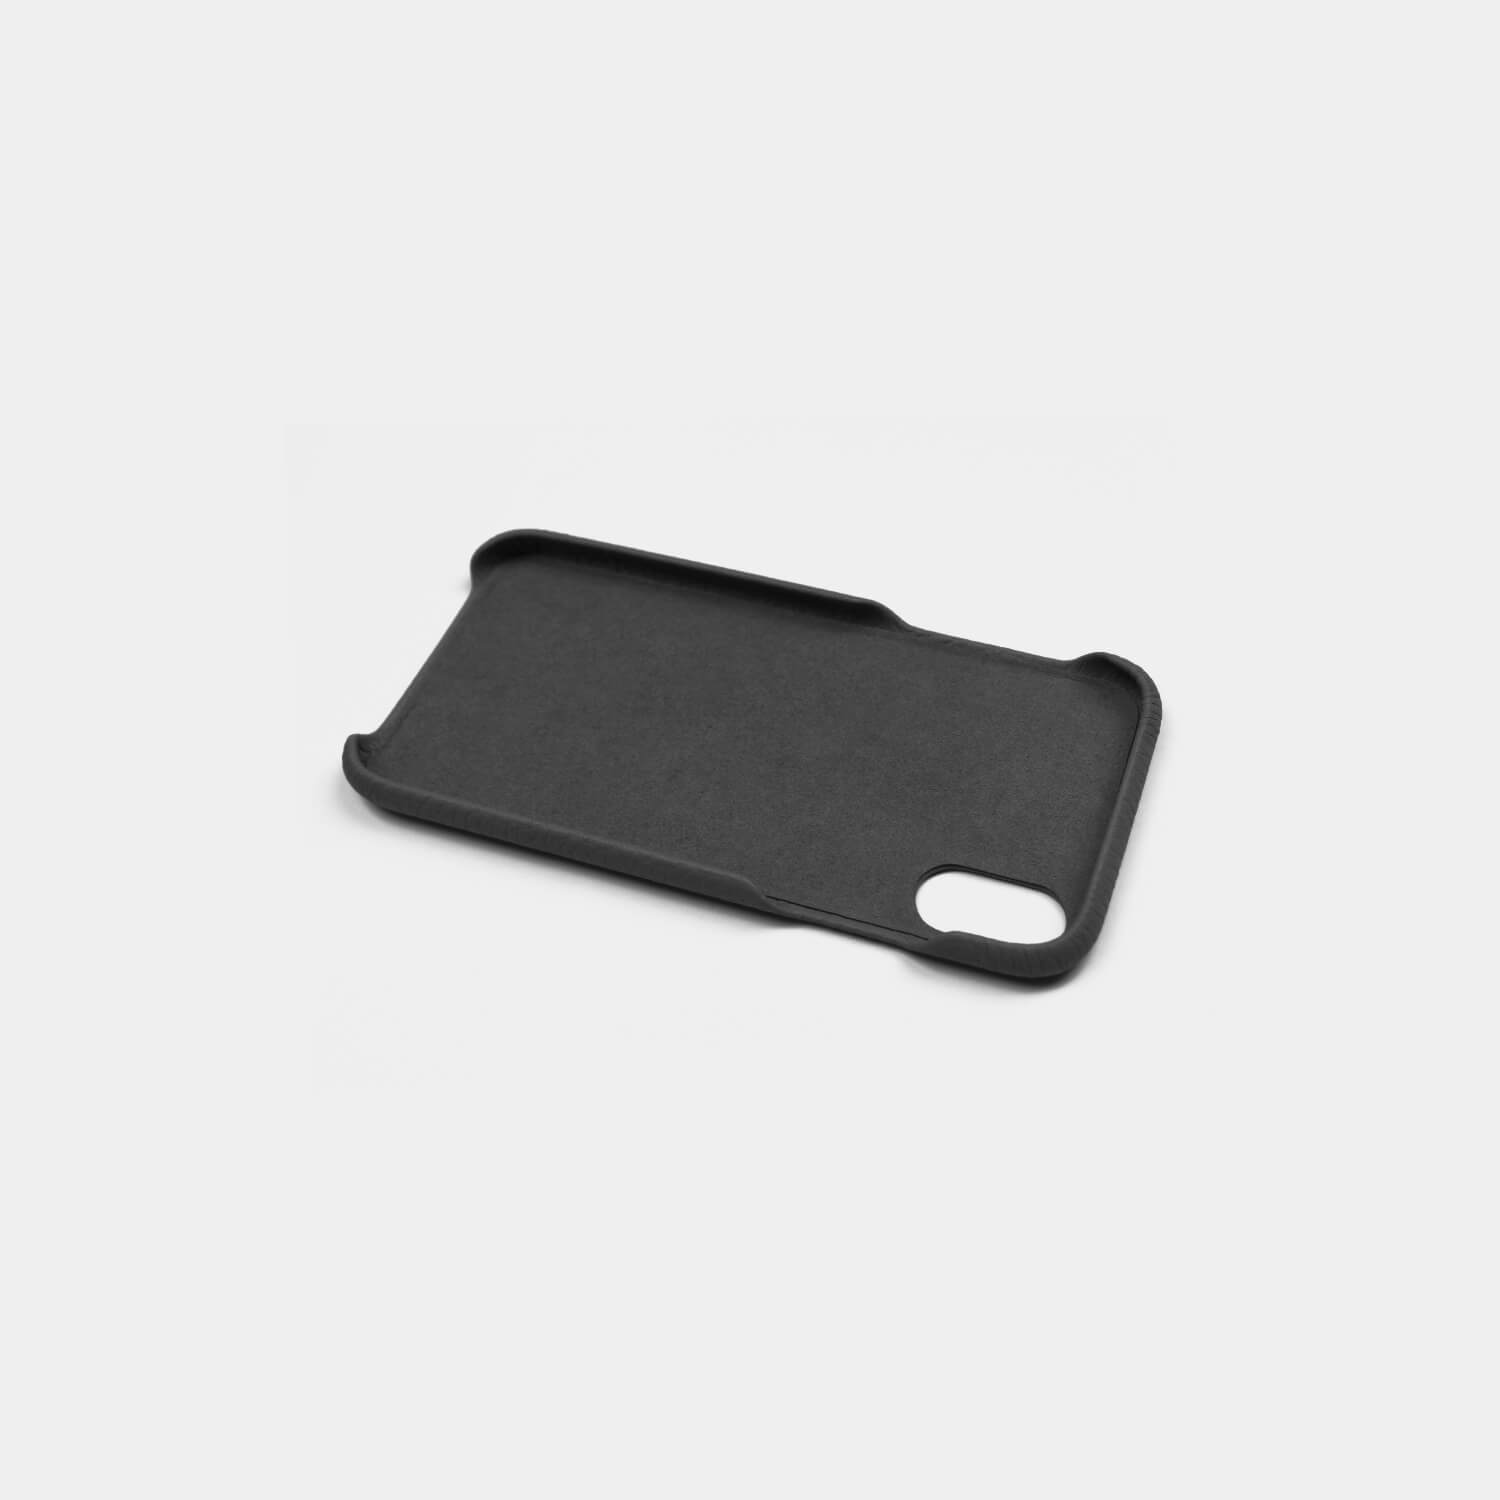 Pebble grain leather Samsung case for all models, moulds to the case to protect the phone